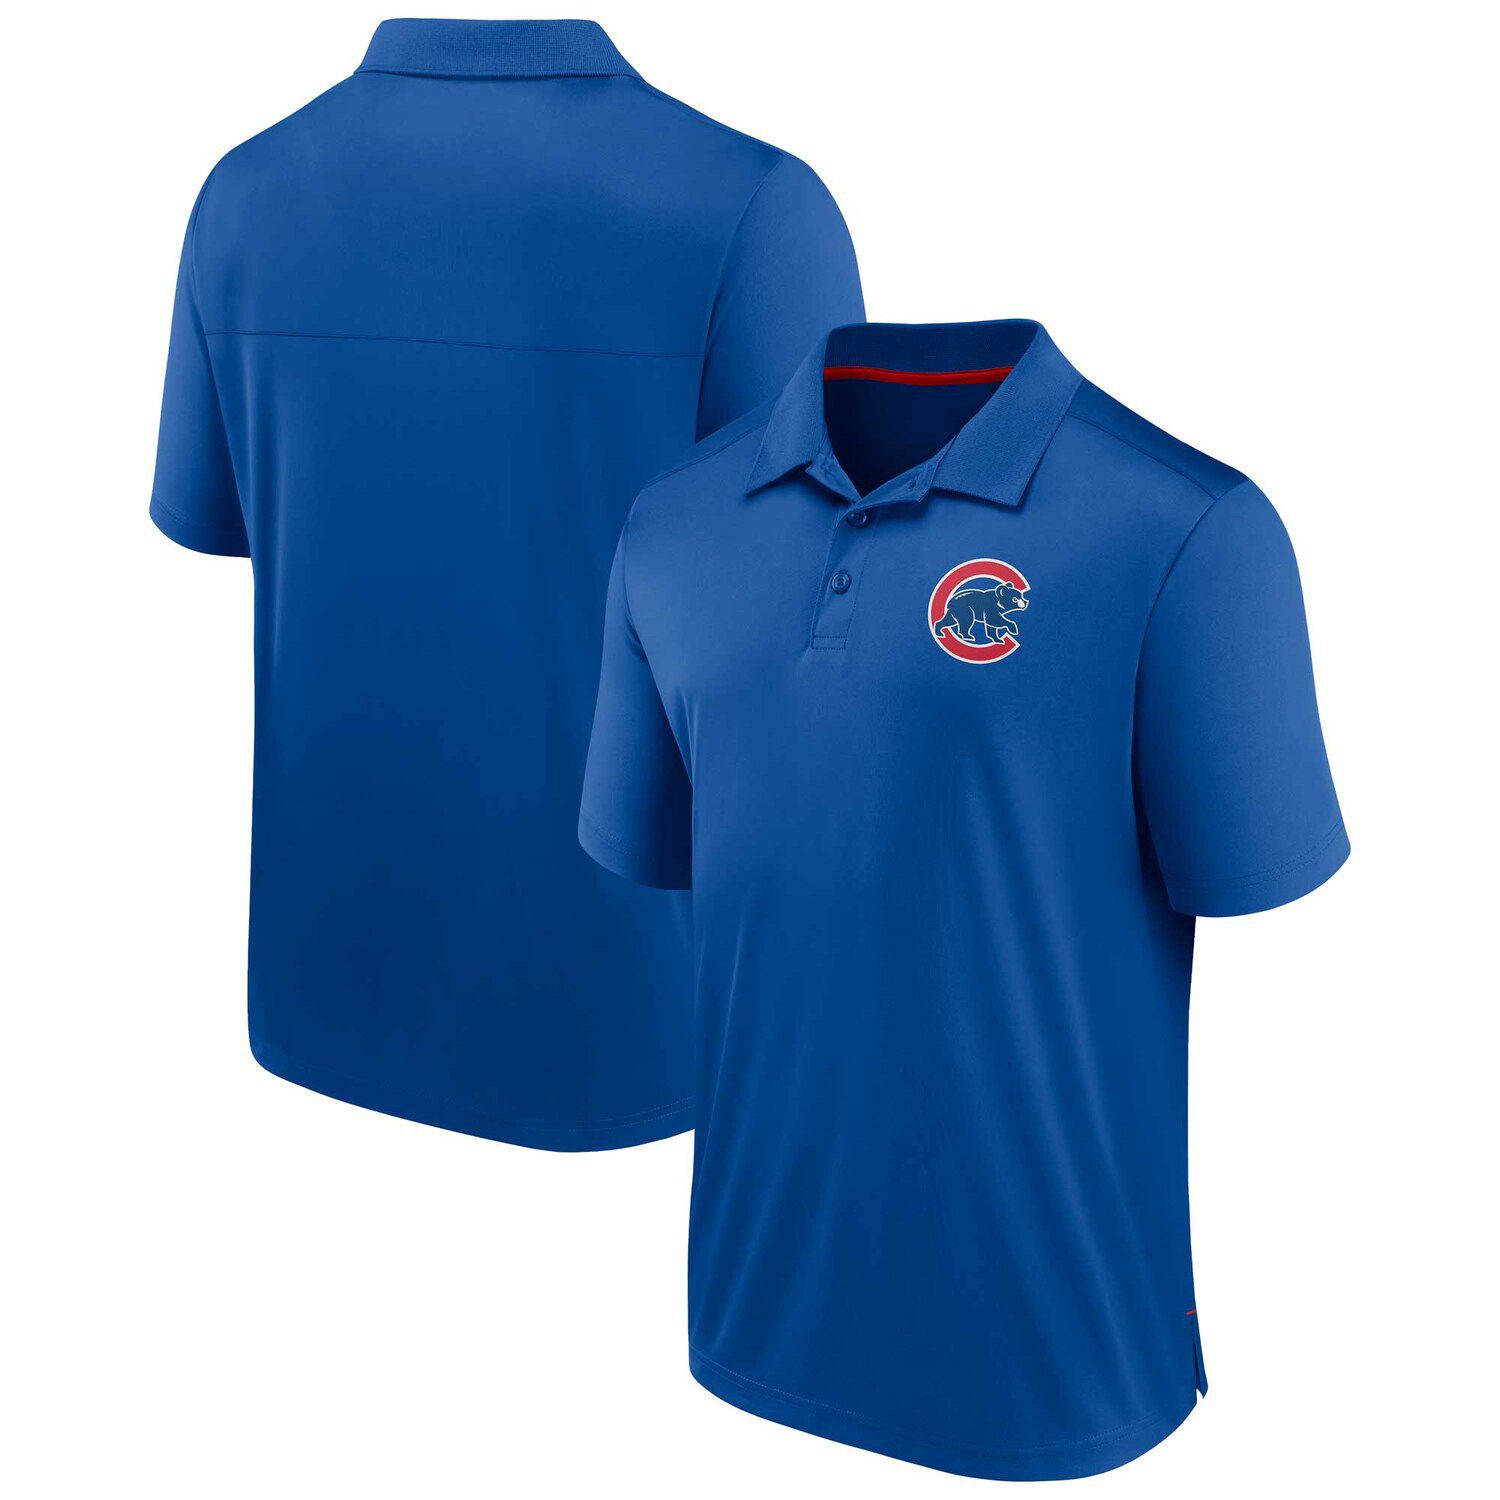 Nike Men's Nike Navy Chicago Cubs City Connect Victory Performance Polo